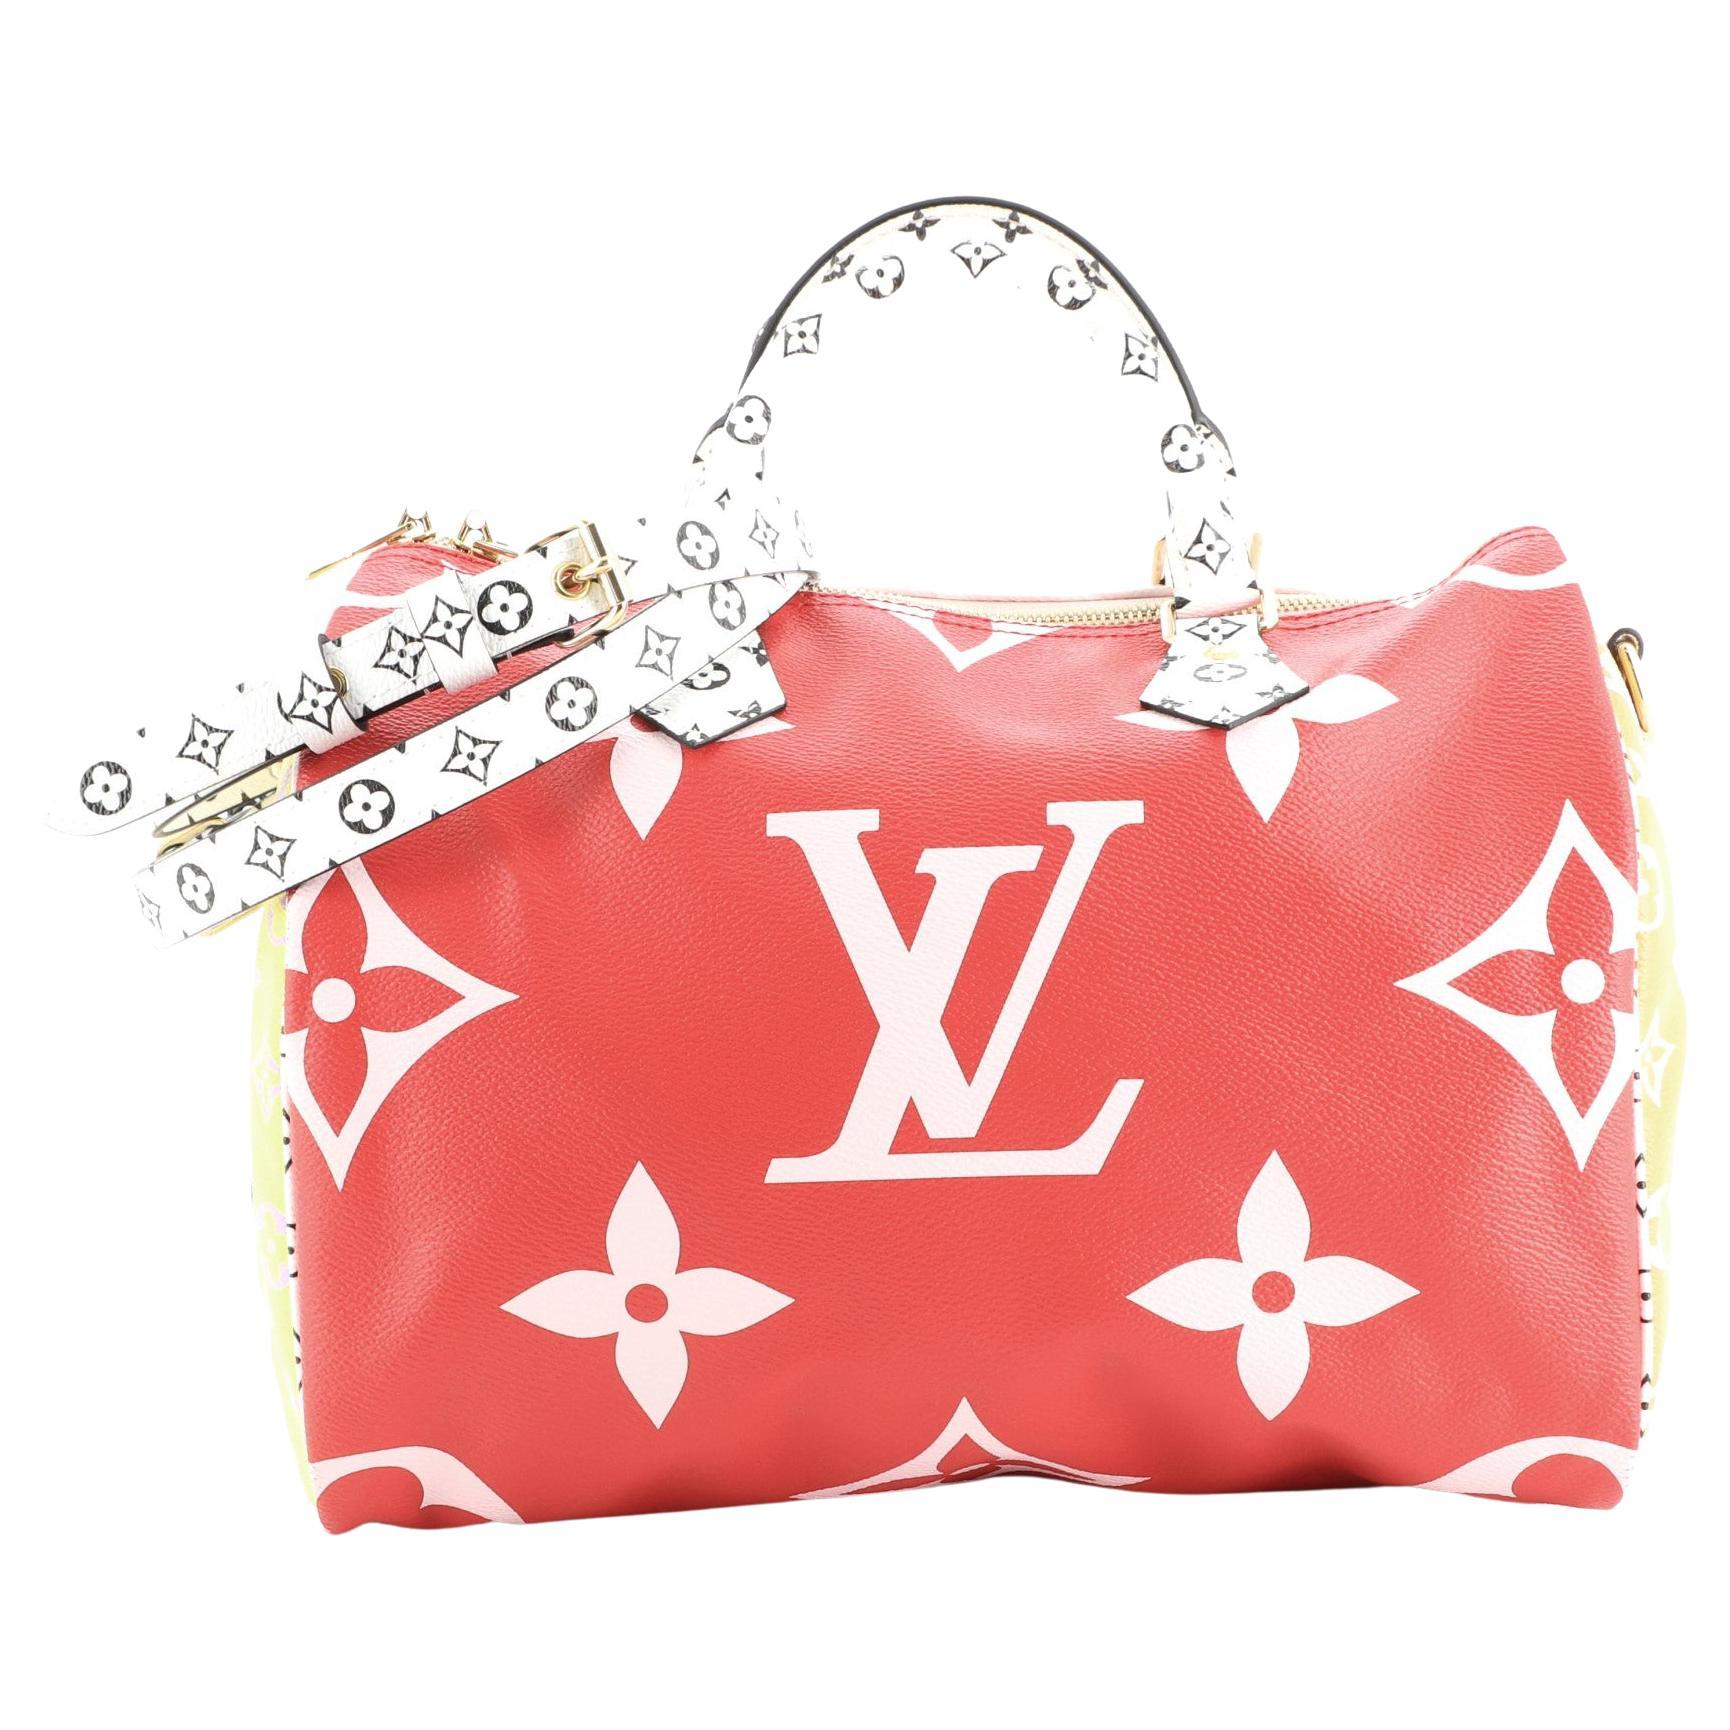 Louis Vuitton Speedy Bandouliere Bag Limited Edition Colored